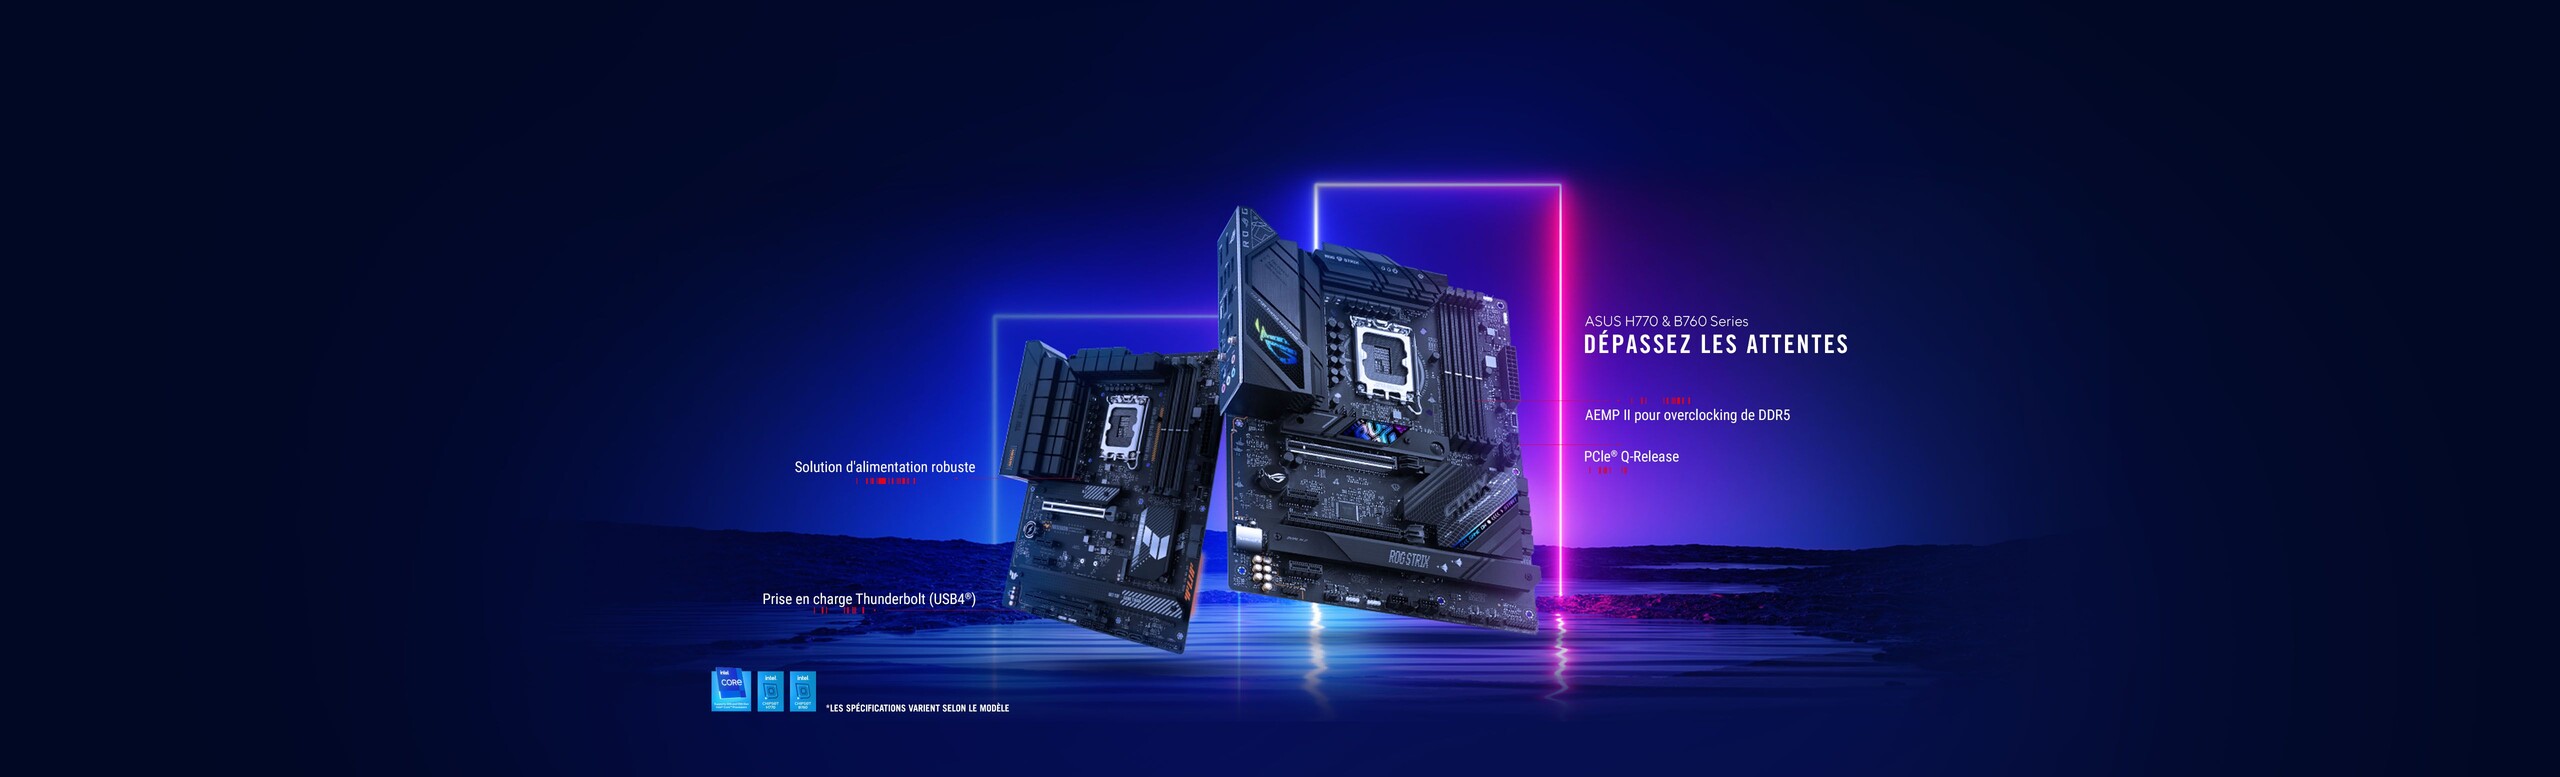 ASUS H770 & B760 Series Shatter Expectations AEMP II for DDR5 Overlocking Robust Power Solution PCle Q-Release Thunderbolt (USB4) Support *Specifications Vary By Model 2 Motherboards in picture along with Intel Logos